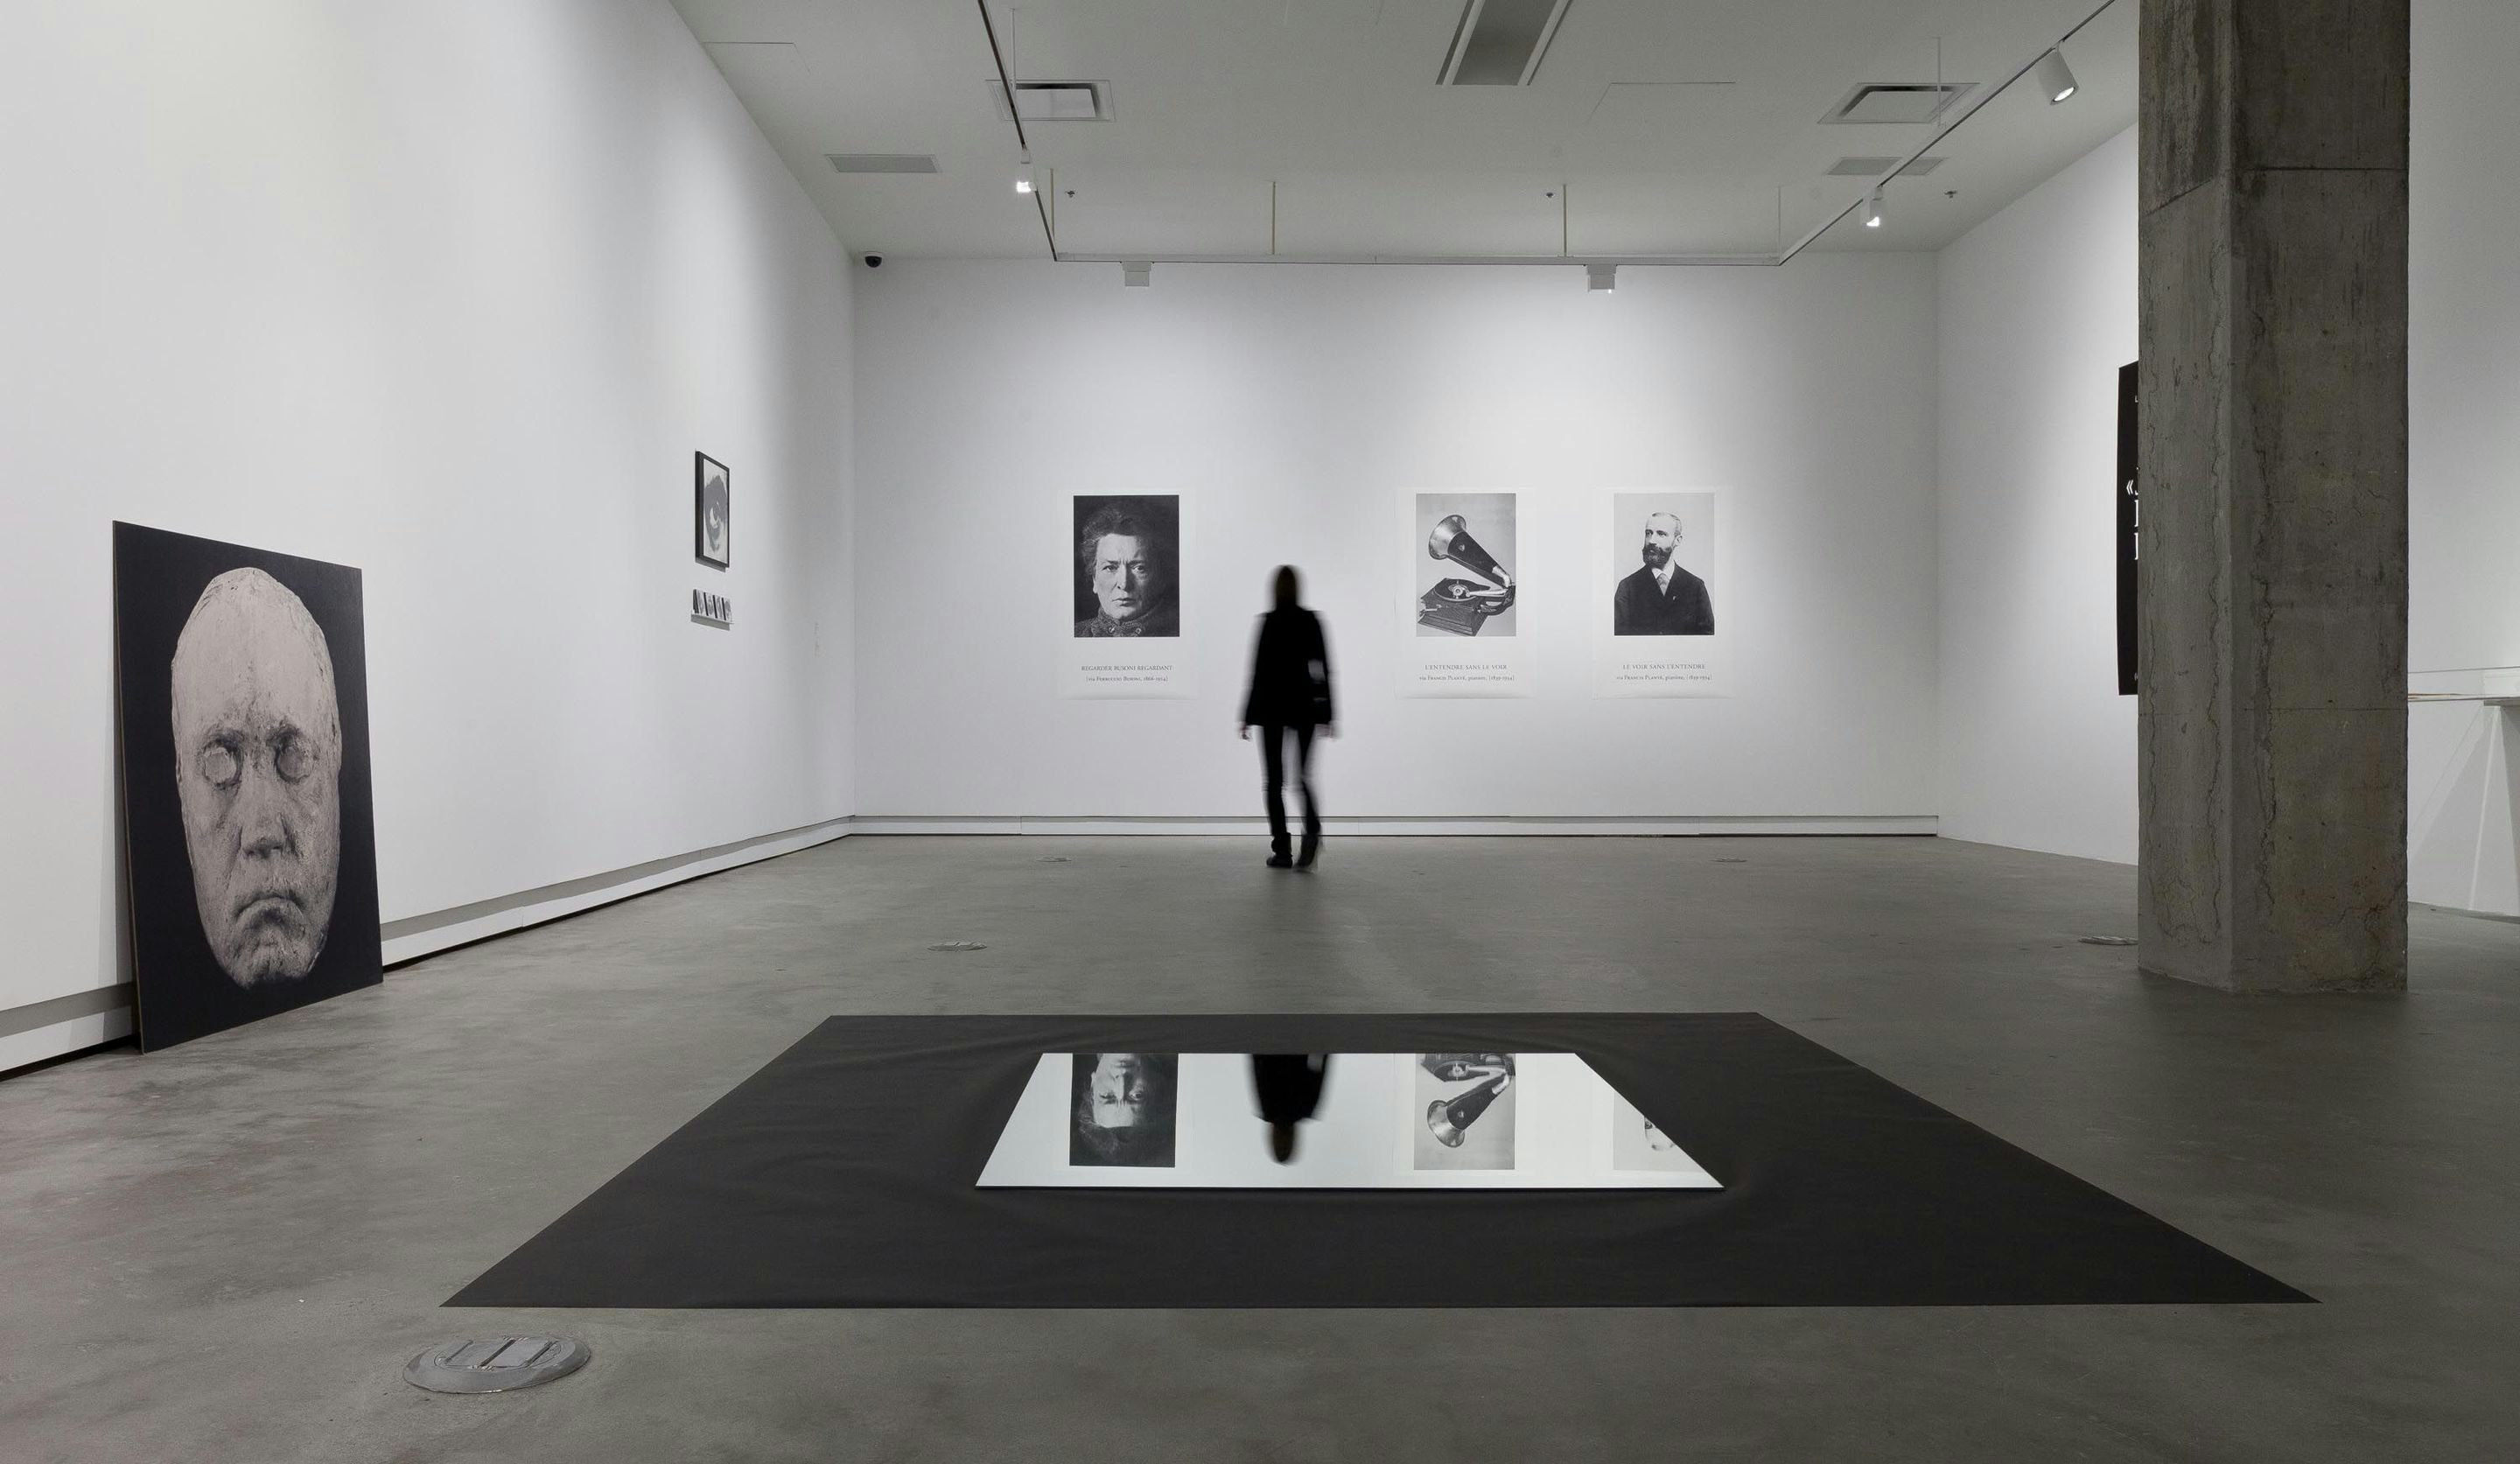 Exhibition View of _Raymond Gervais: 3 x 1_, 2012. Photo : Michel Brunelle.